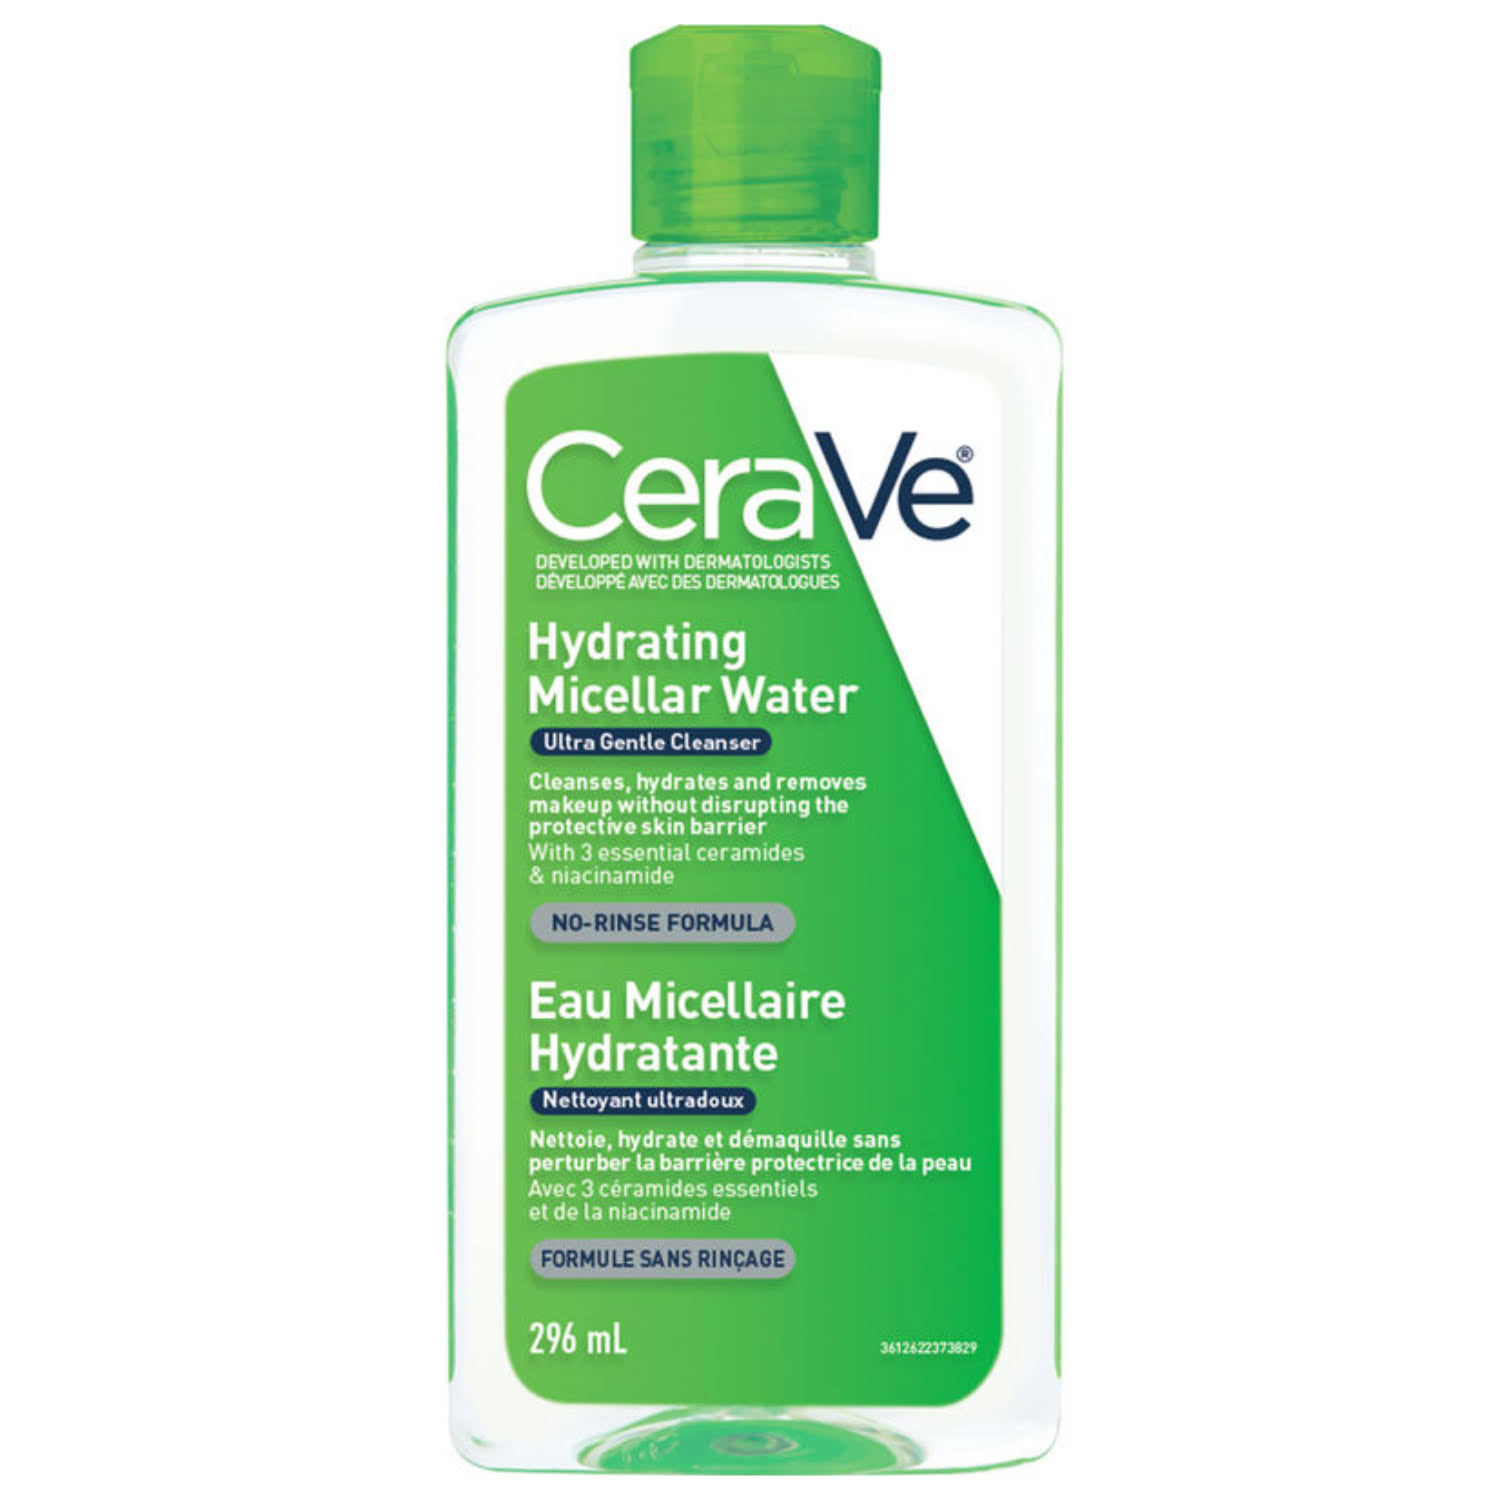 CeraVe Hydrating Micellar Water Cleanser & Eye Makeup Remover with Essential Ceramides, Hyaluronic Acid and Niacinamde (Vitamin B3) 296.0 mL